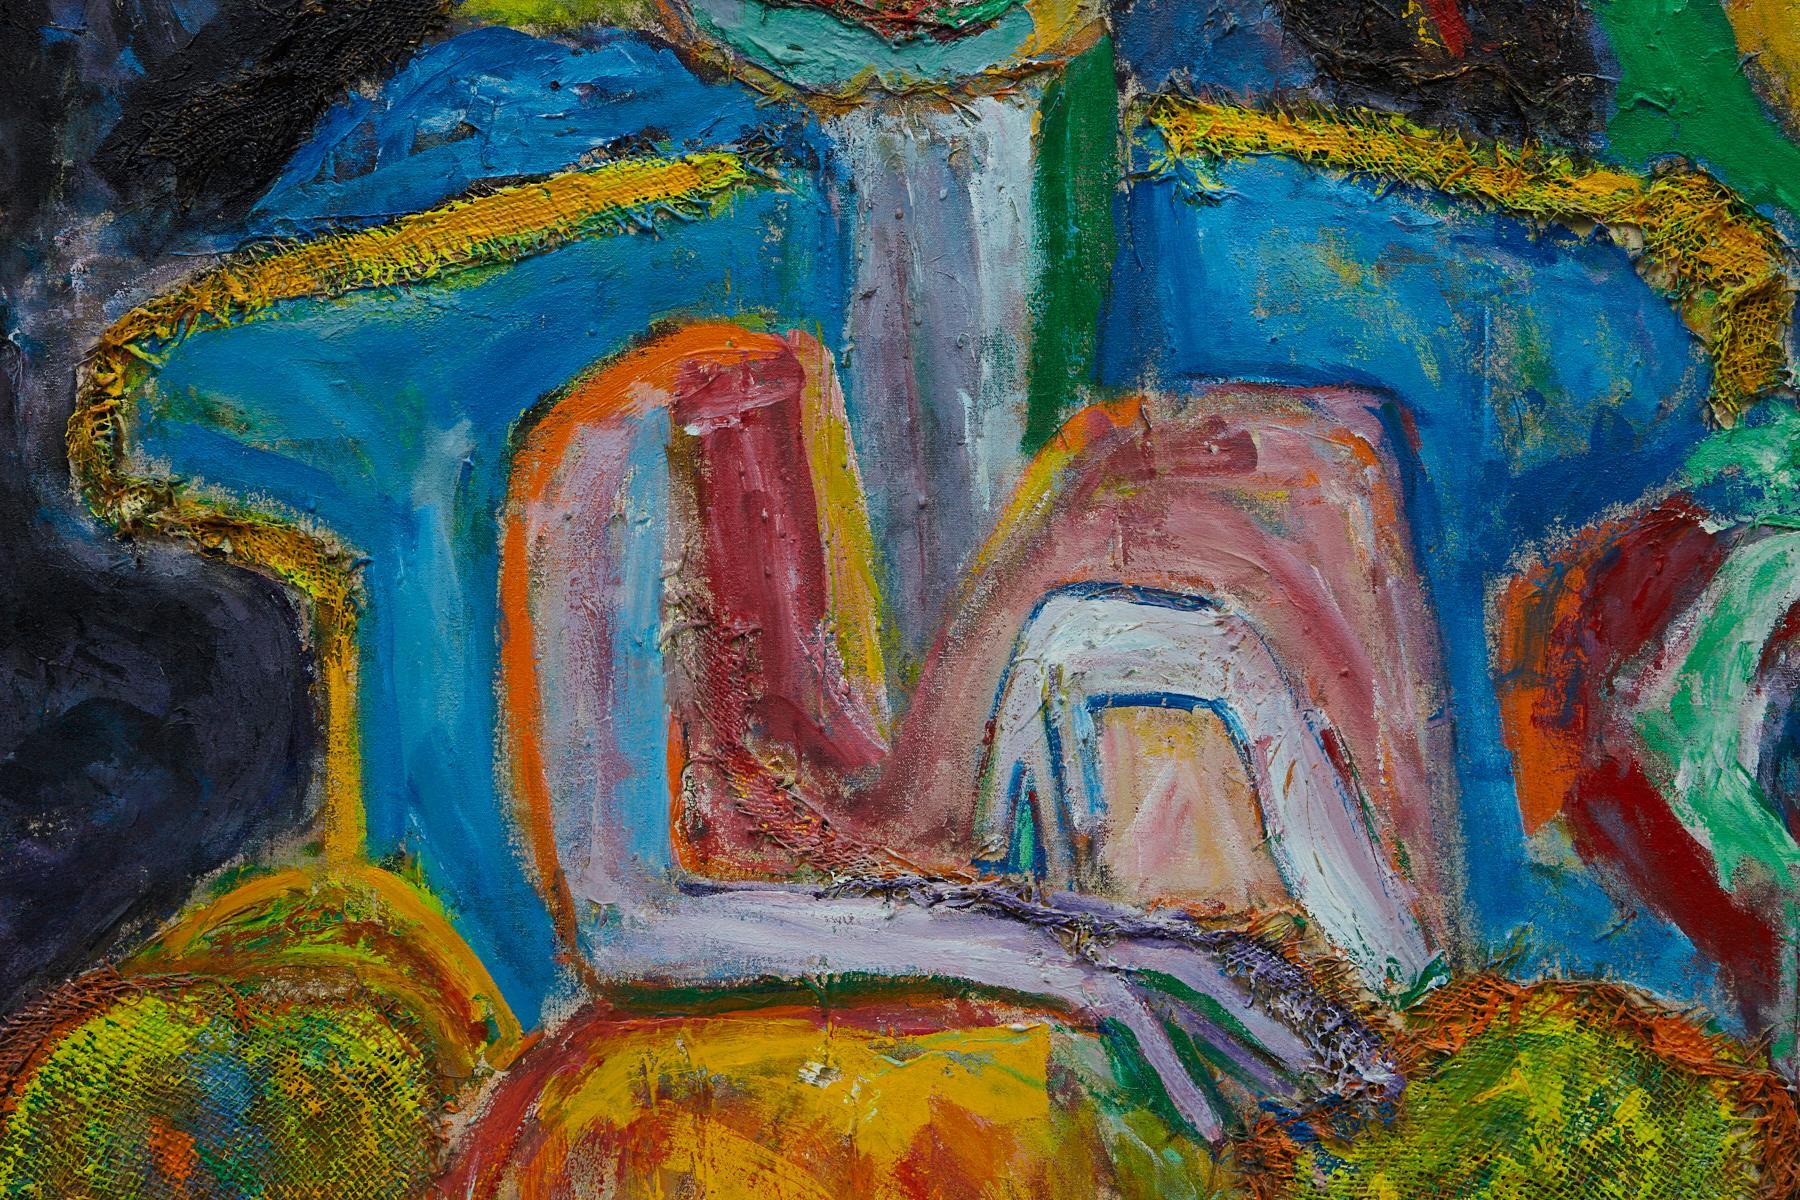 Girl In A Blue Chair - Expressionist Painting by Wyona Diskin